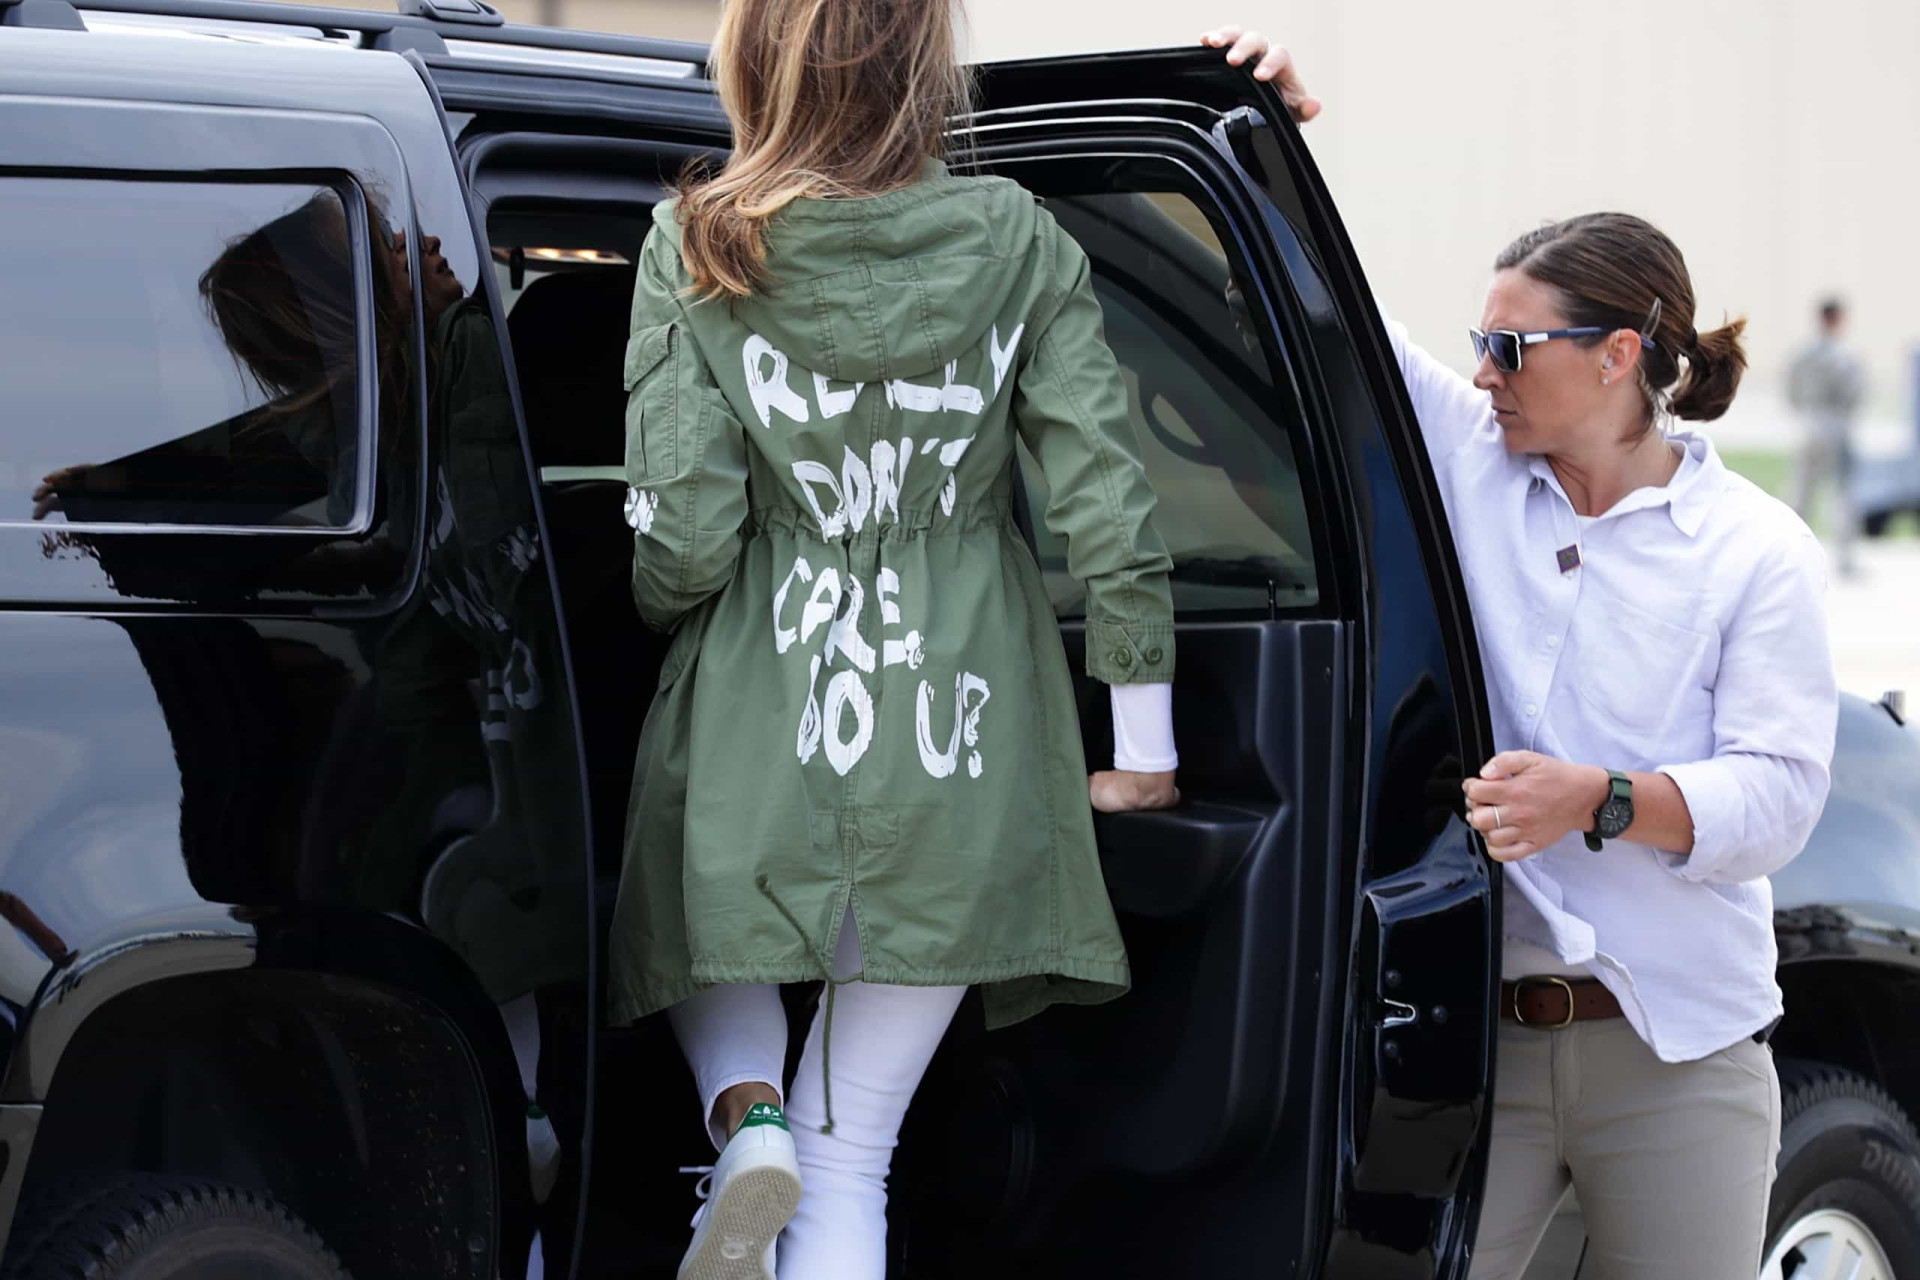 <p>Melania Trump was criticized when she wore this jacket with the words "I really don't care, do u?"</p><p><a href="https://www.msn.com/en-us/community/channel/vid-7xx8mnucu55yw63we9va2gwr7uihbxwc68fxqp25x6tg4ftibpra?cvid=94631541bc0f4f89bfd59158d696ad7e">Follow us and access great exclusive content every day</a></p>